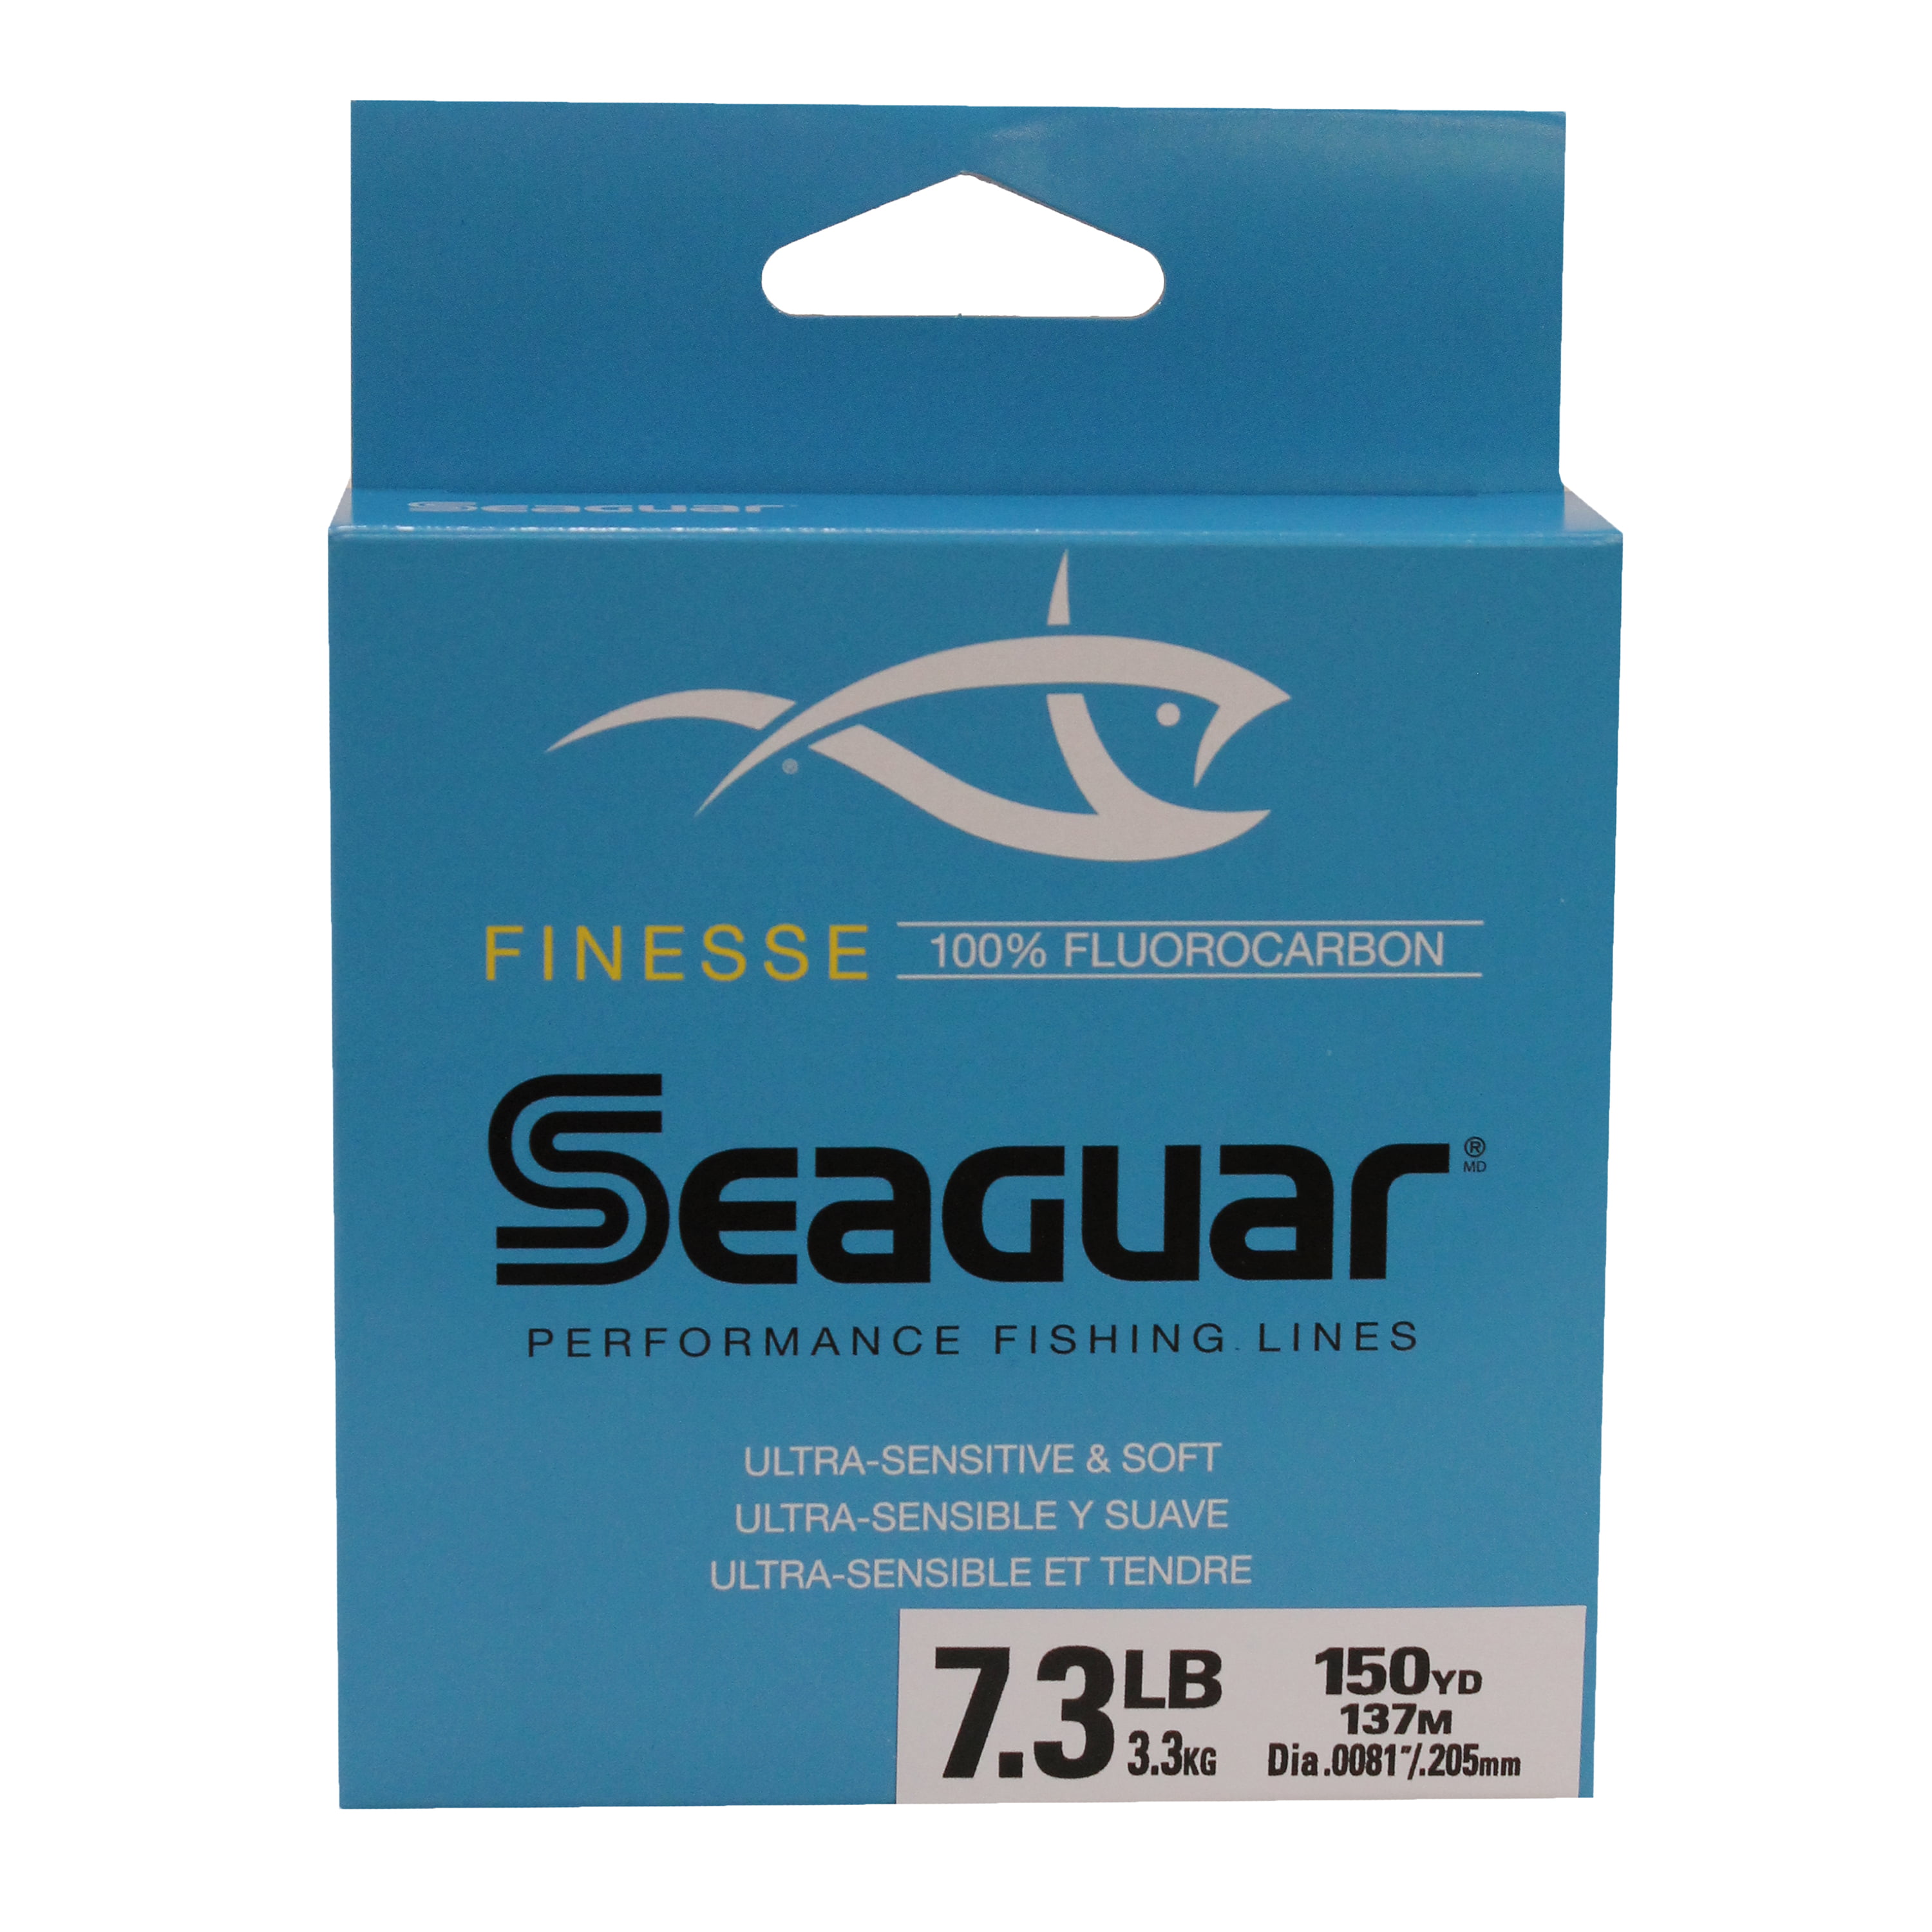 Seaguar Finesse Fluorocarbon Clear Fishing Line 150 Yards Select Lb Test 